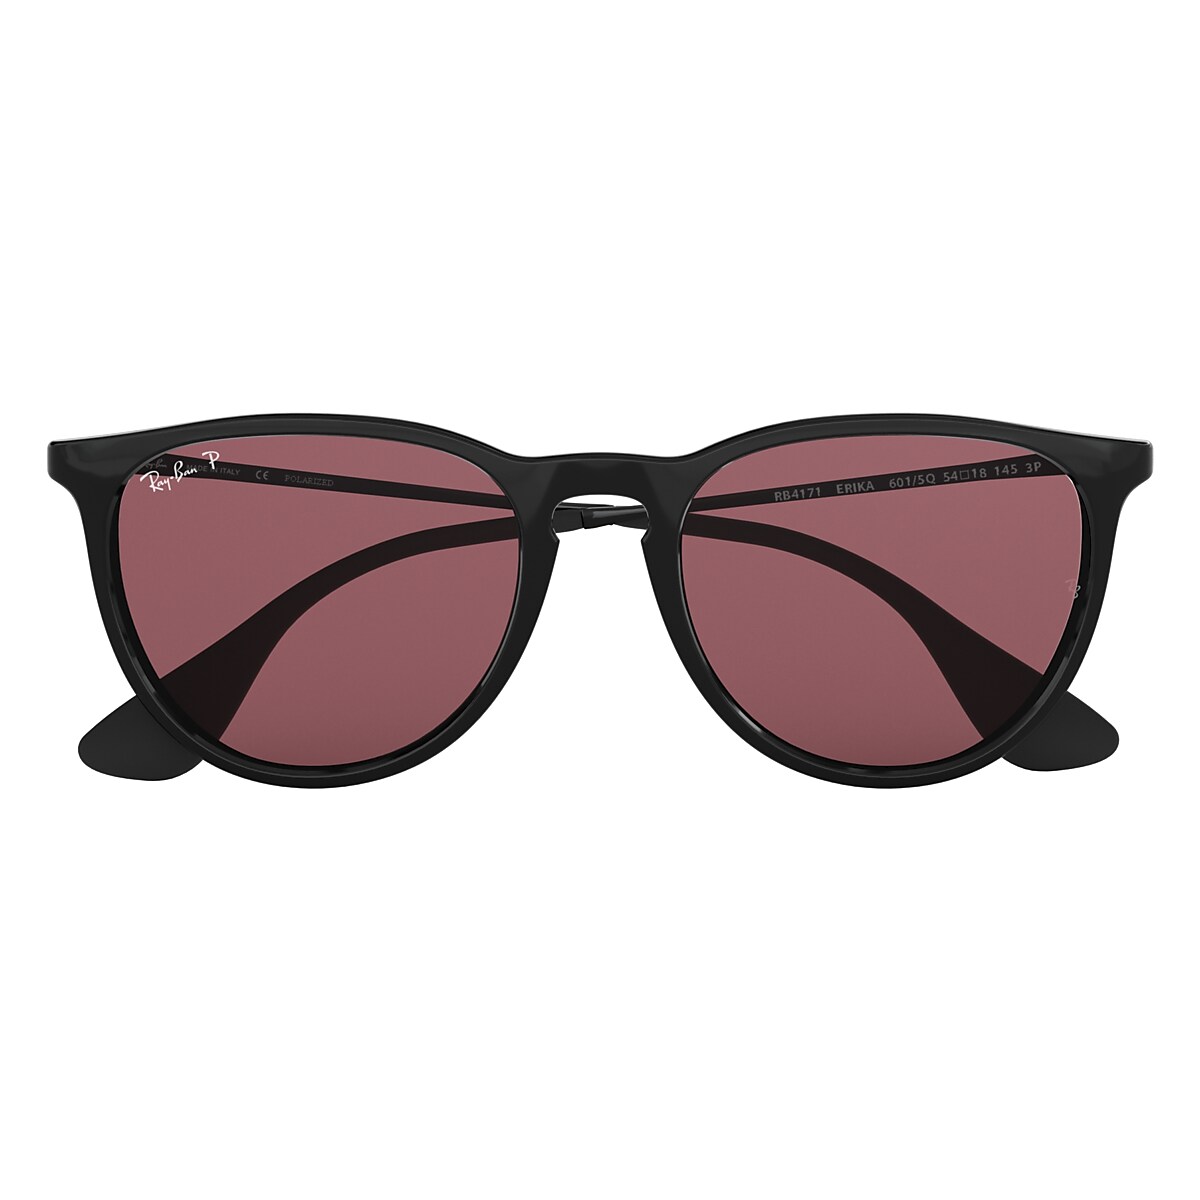 ERIKA CLASSIC Sunglasses in Black and Purple - RB4171 | Ray-Ban® US